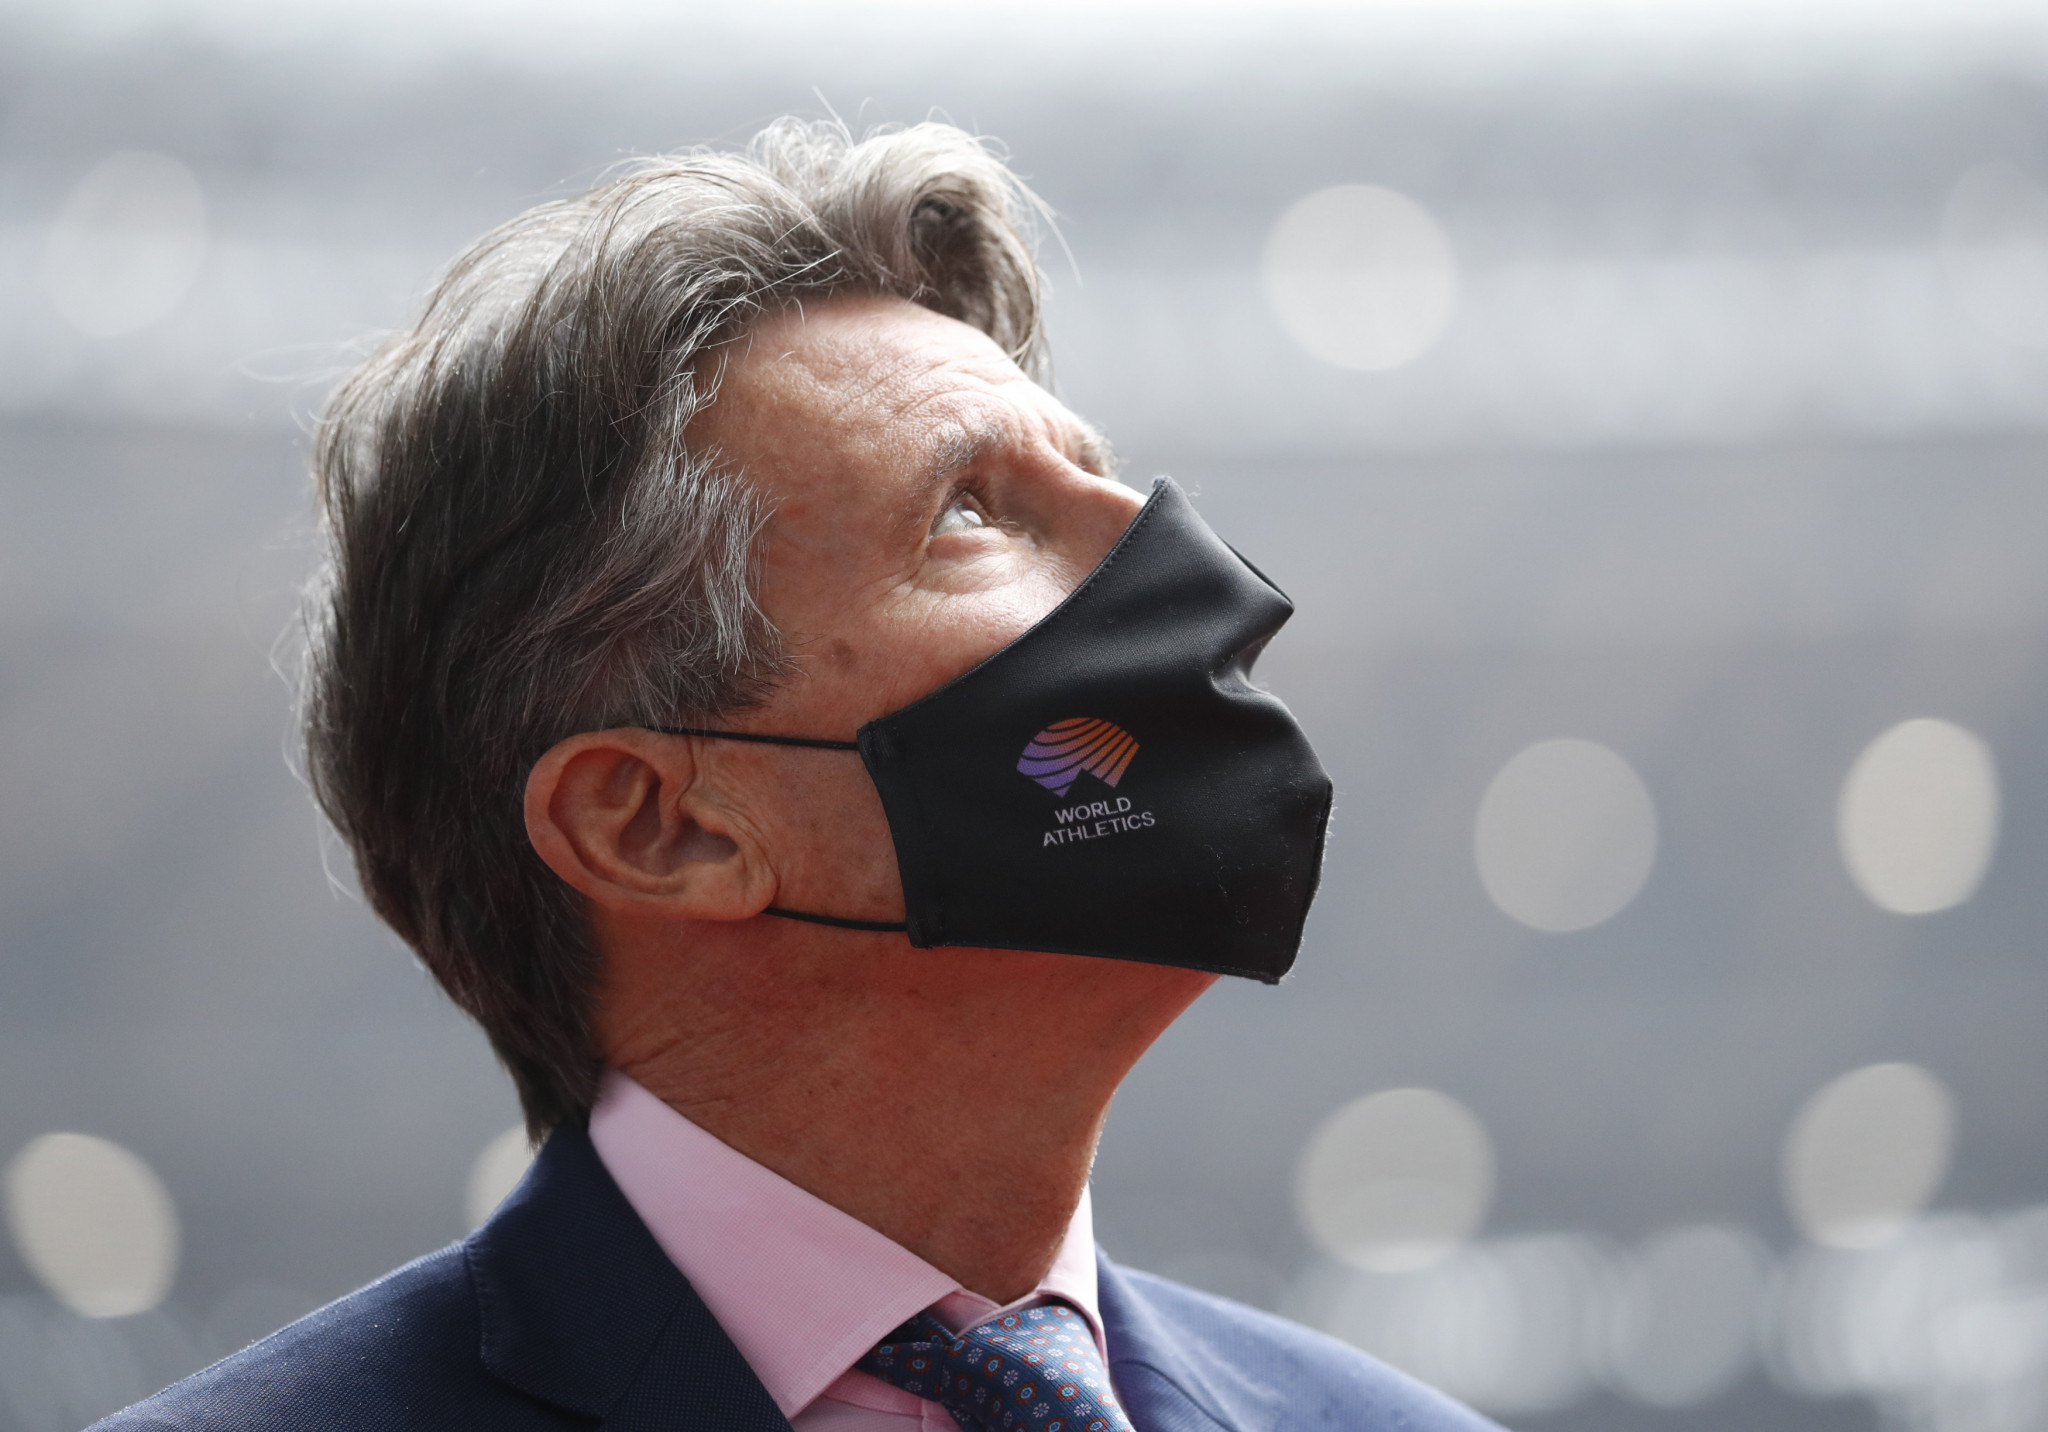 The European Athletics view on IOC Rule 50, regarding athltetes' protests at the Games, differs from that held by World Athletics President Sebastian Coe ©Getty Images